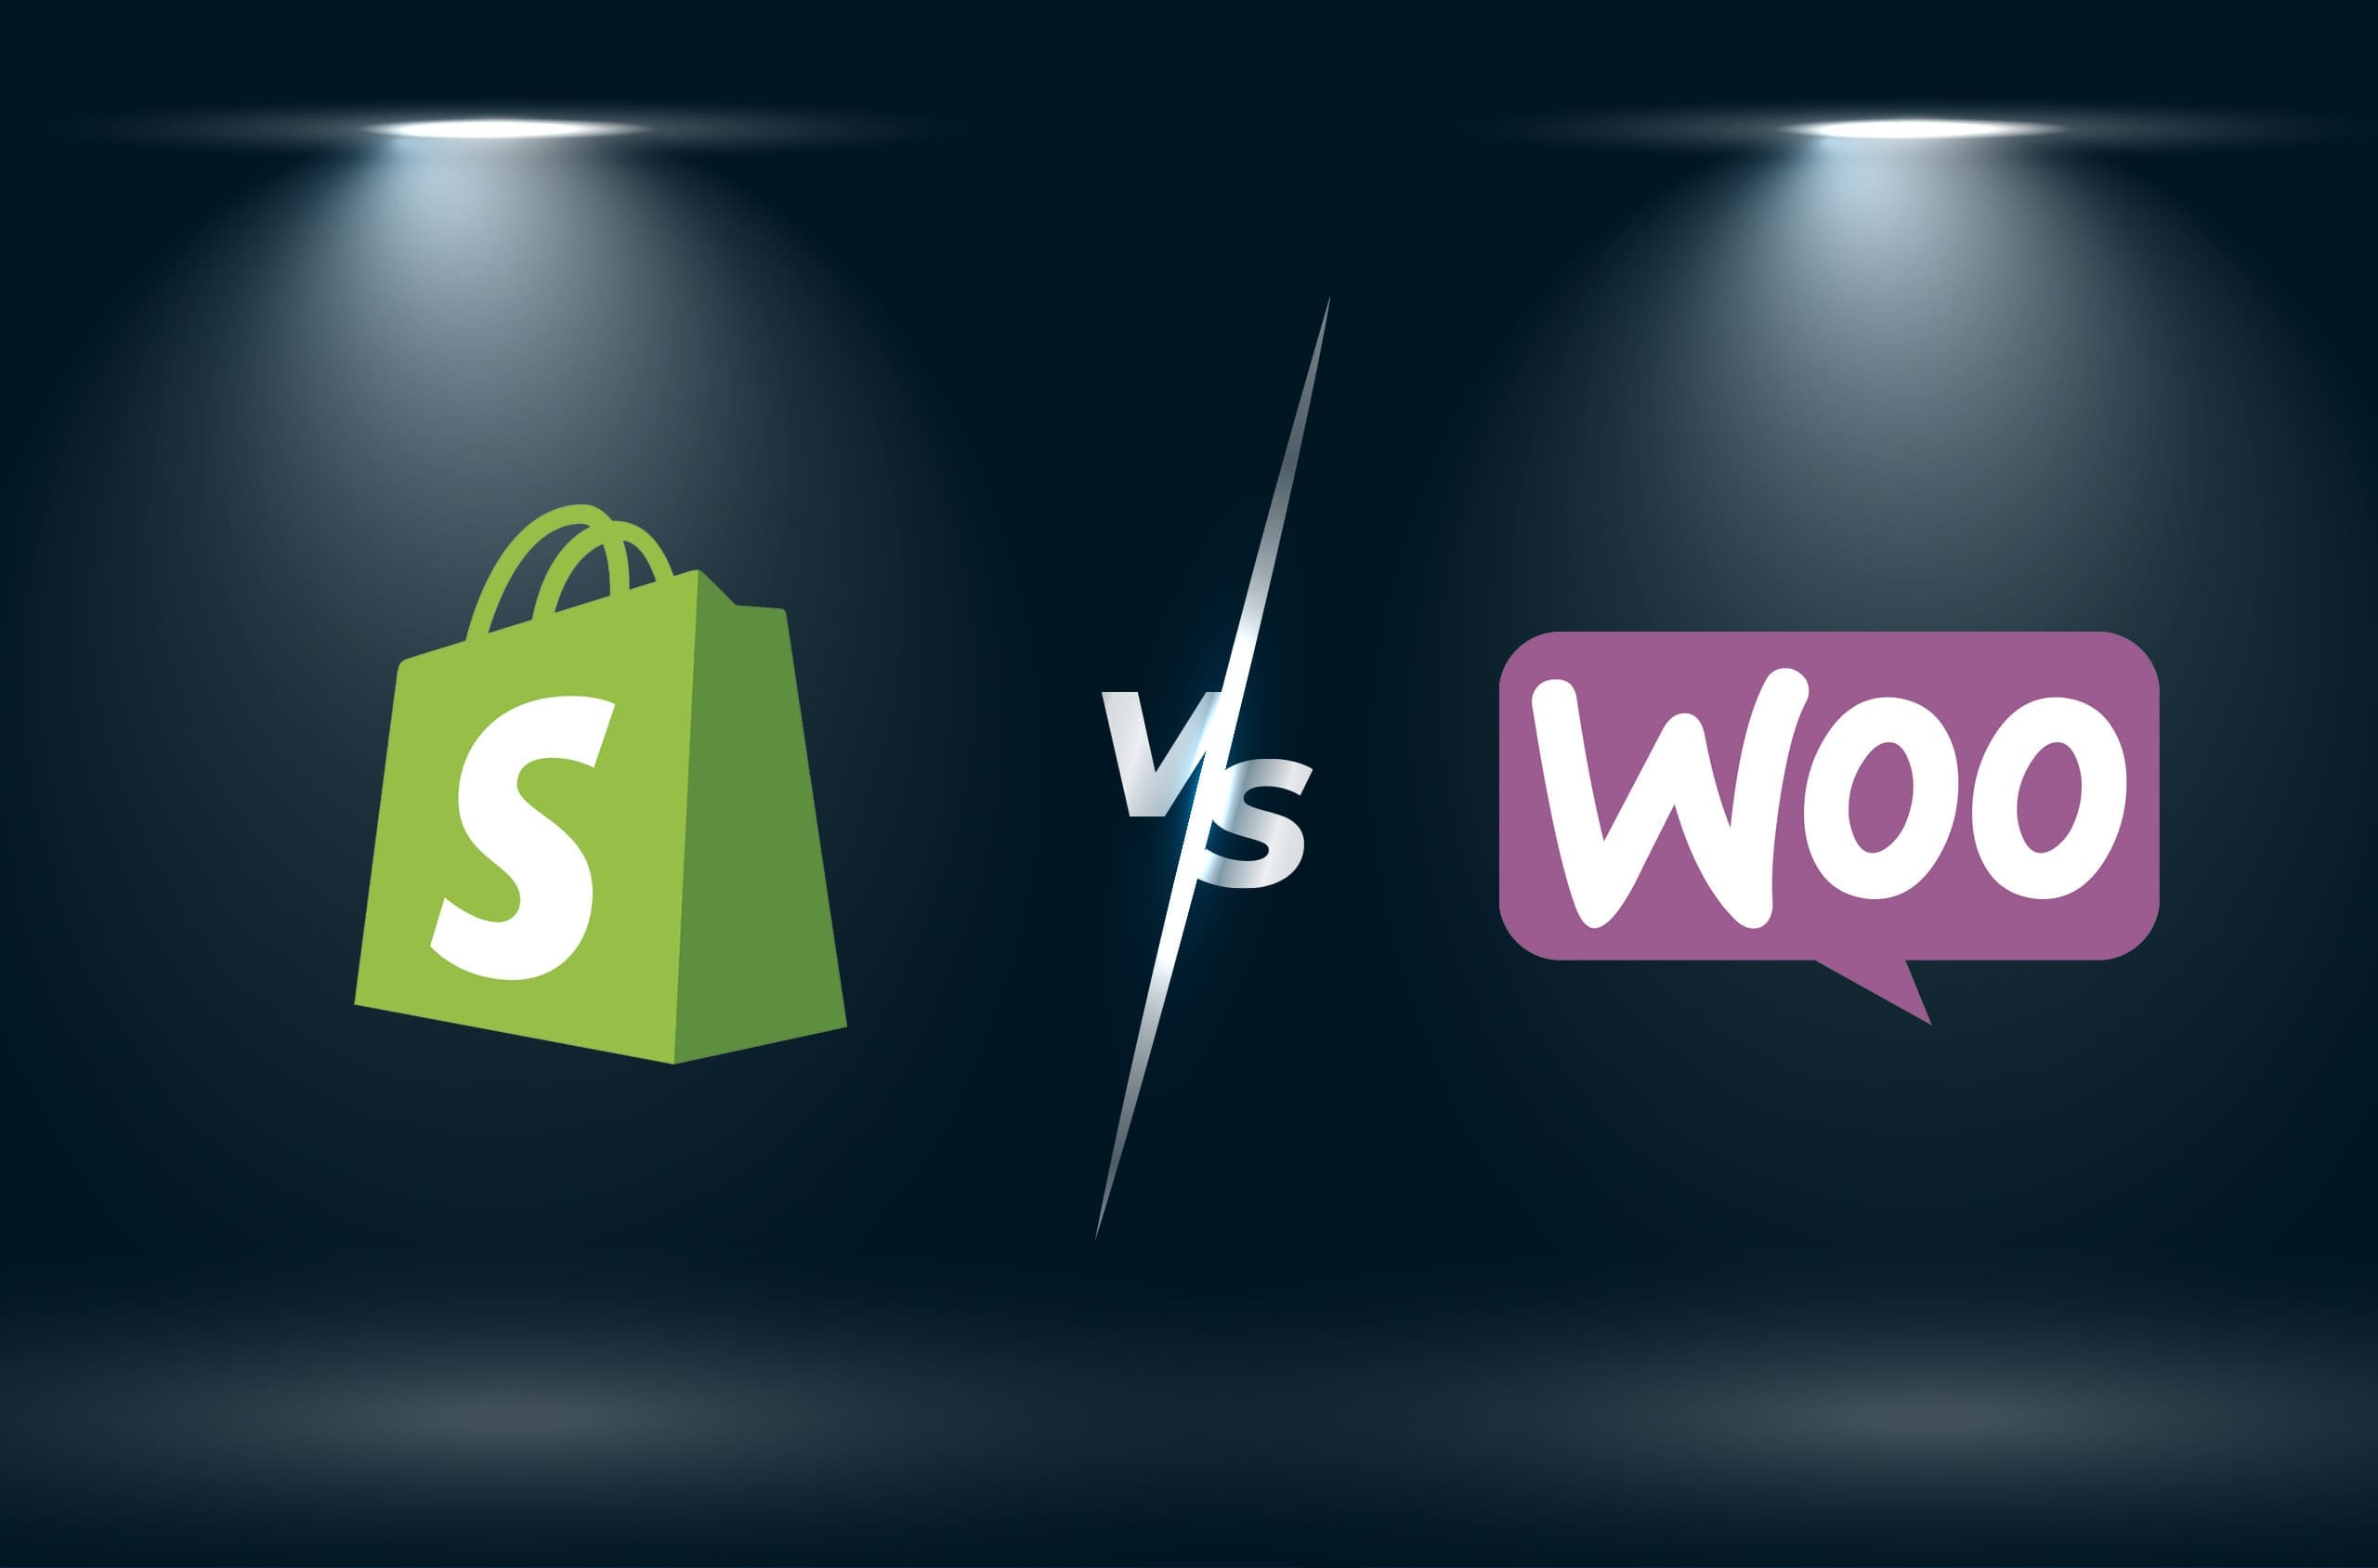 Comparison graphic depicting two shopping icons, one labeled "s" in a green bag under a spotlight and another labeled "woo" in a purple speech bubble, separated by a "vs" sign.